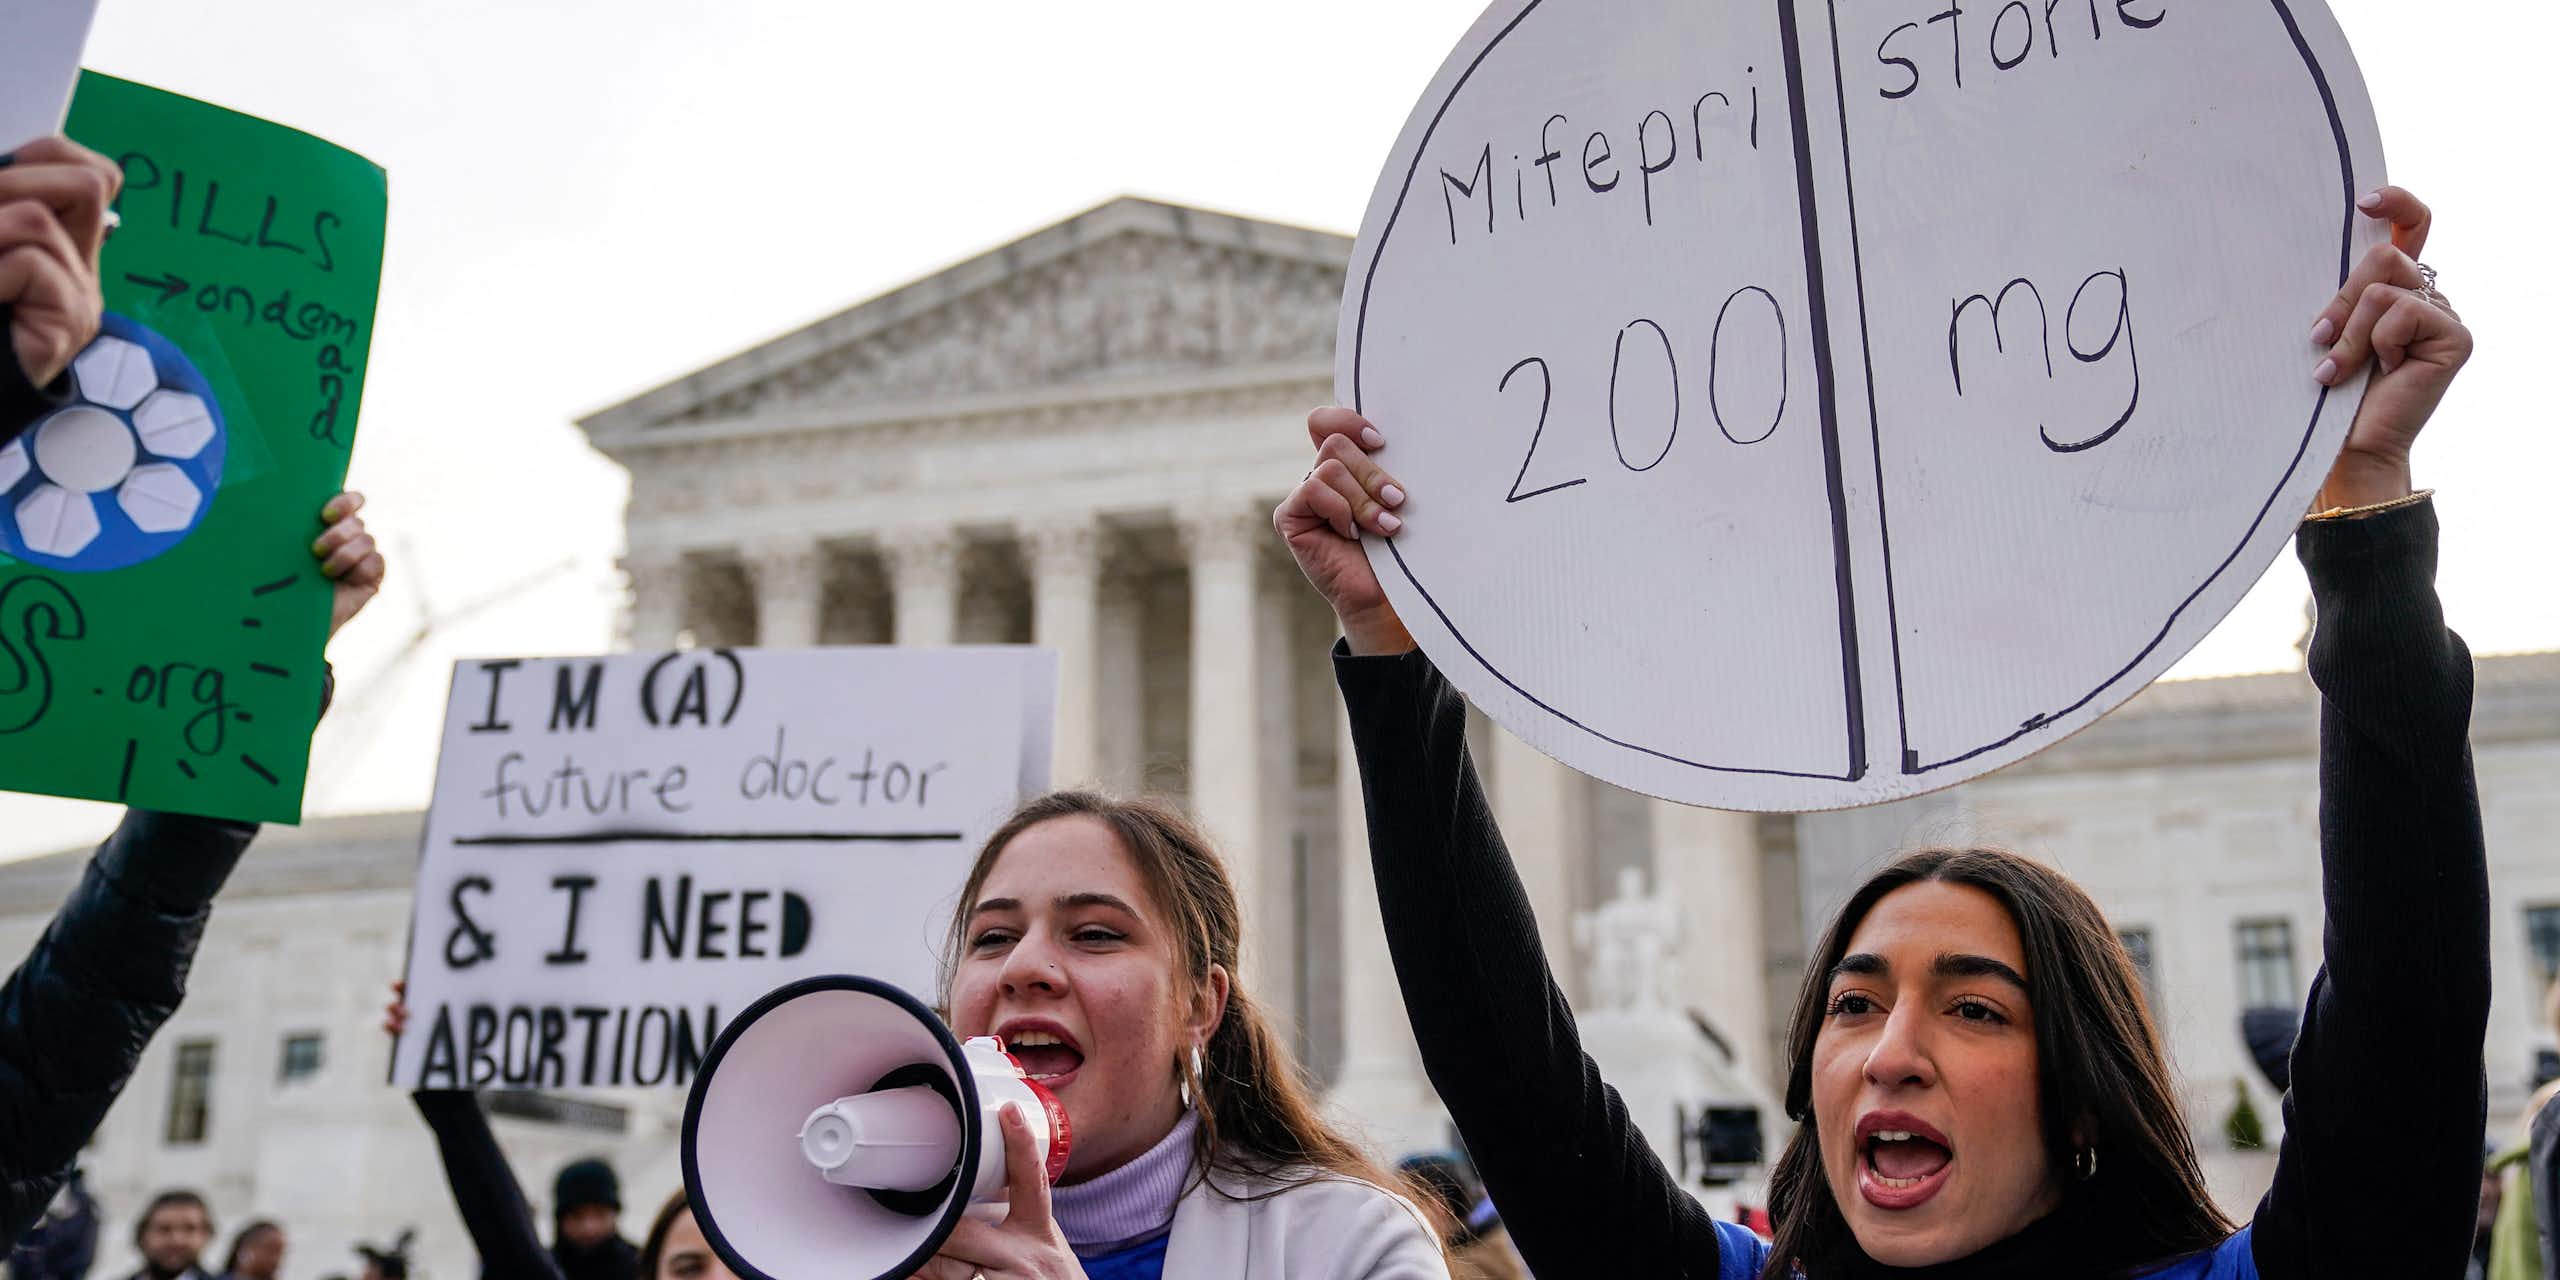 Women hold a bullhorn and a sign that says 'Mifepristone' outside the Supreme Court on a gray day.